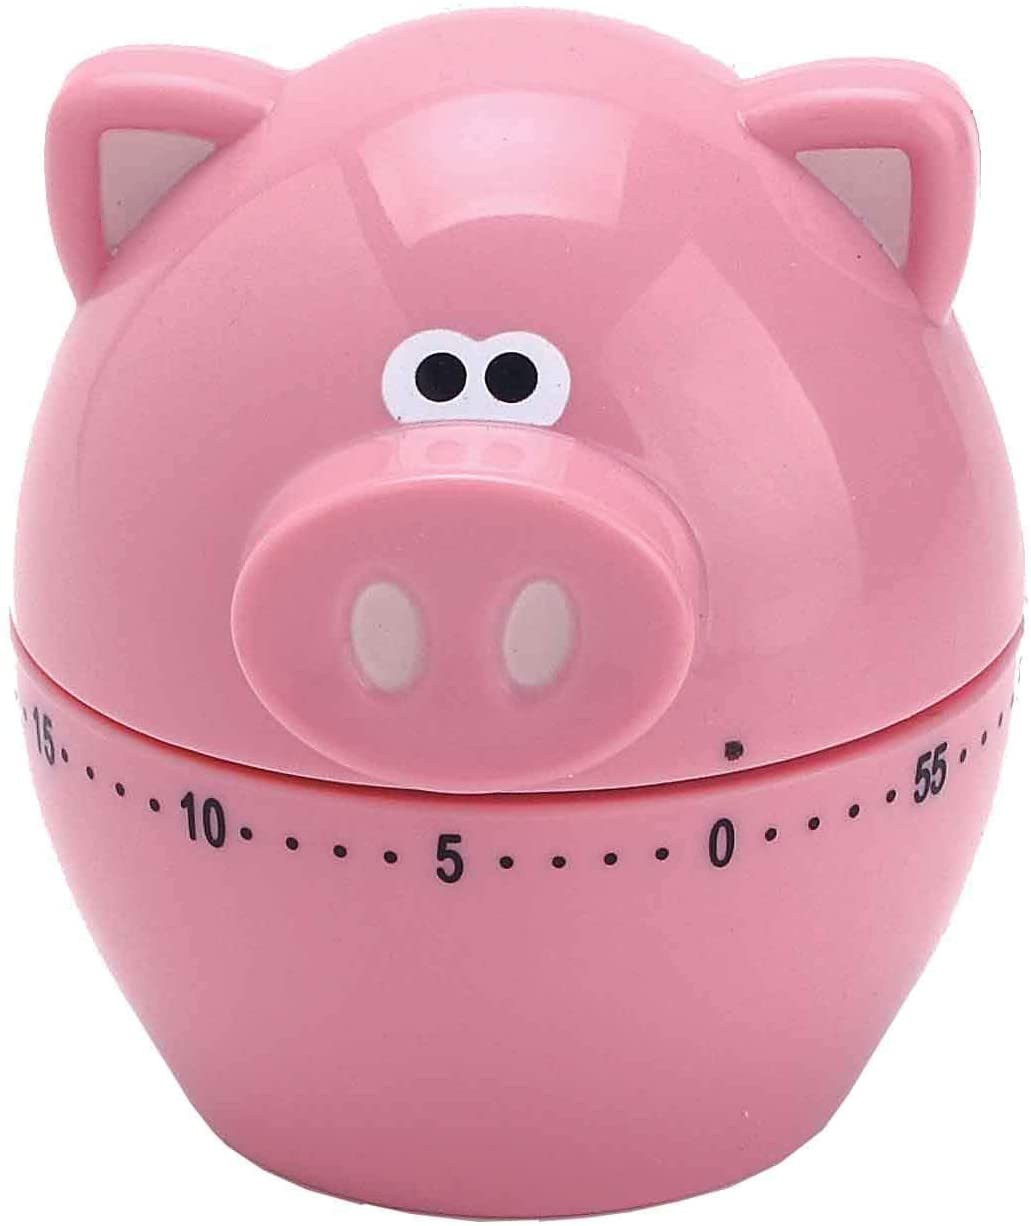 Drinking game equipment: The Piggy Wiggy Timer